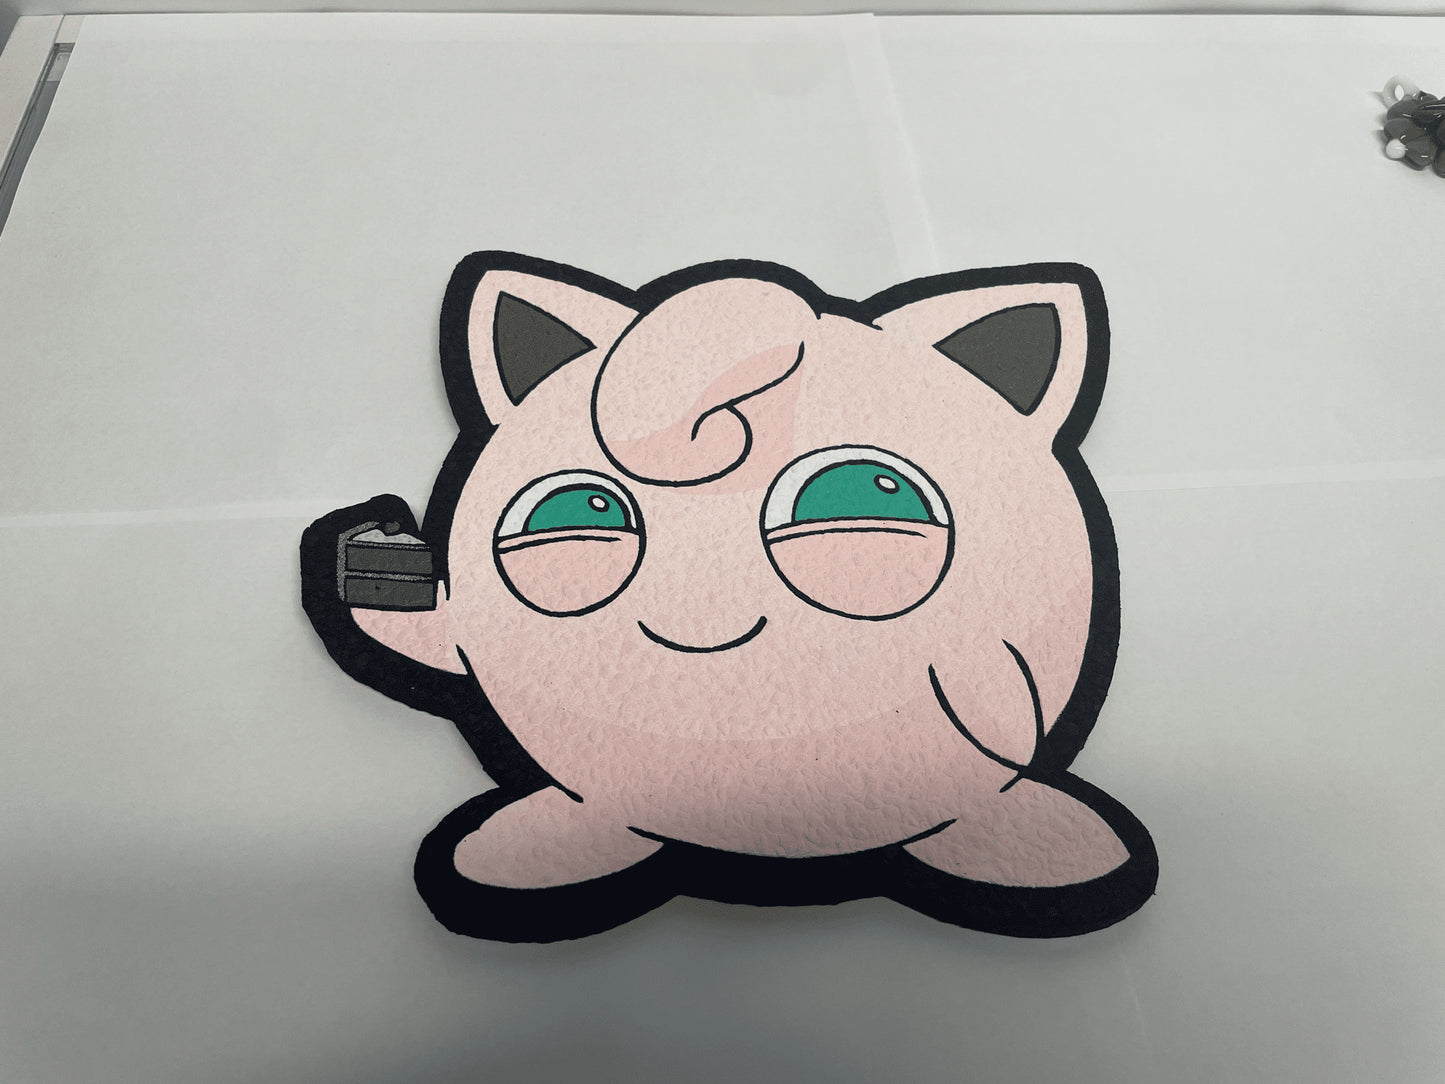 meticulously crafted art piece - Jigglypuff Moodmat